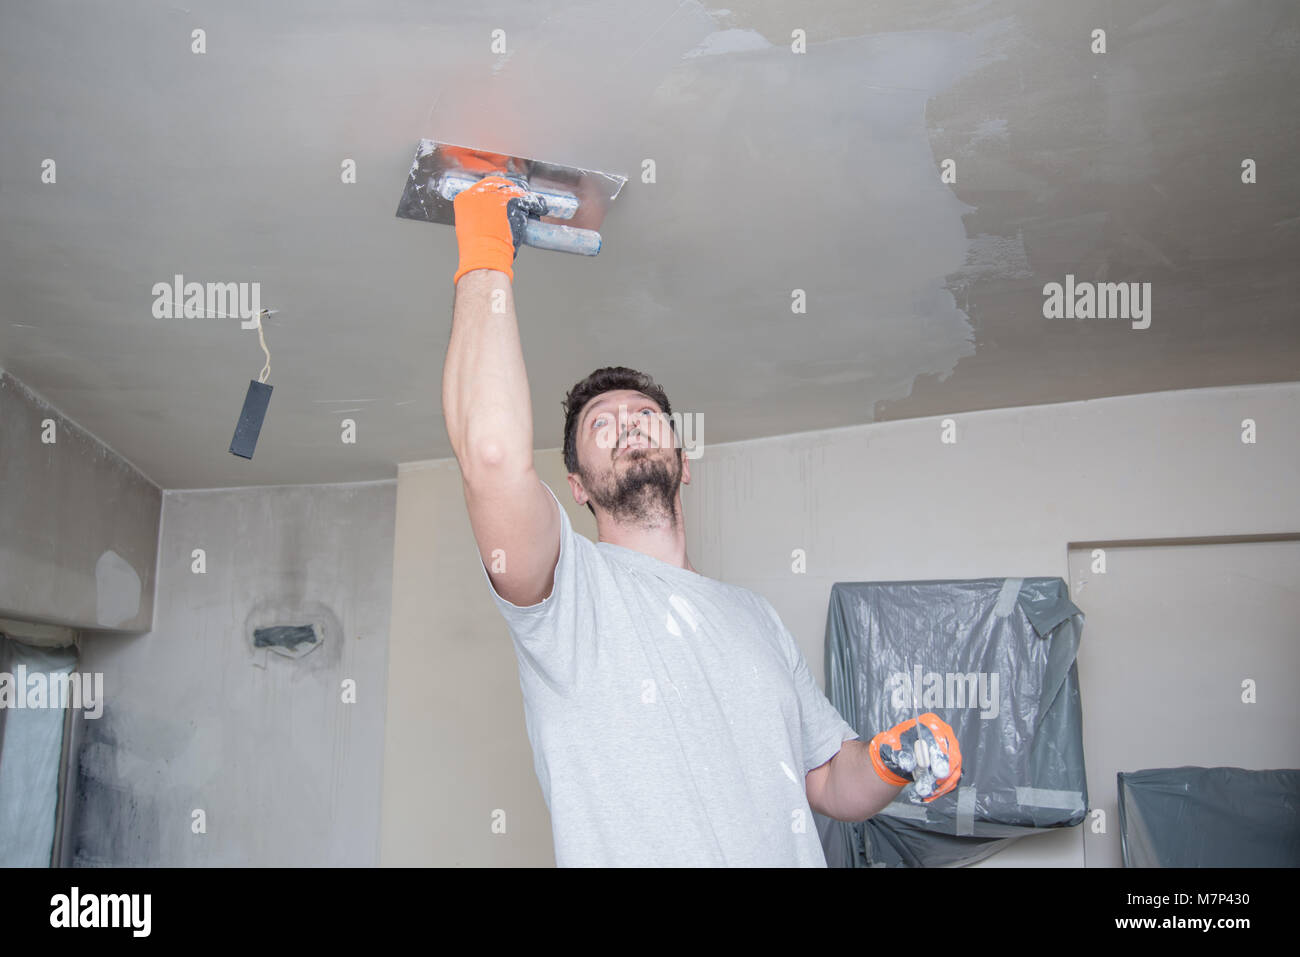 Worker Plastering Ceiling Stock Photo